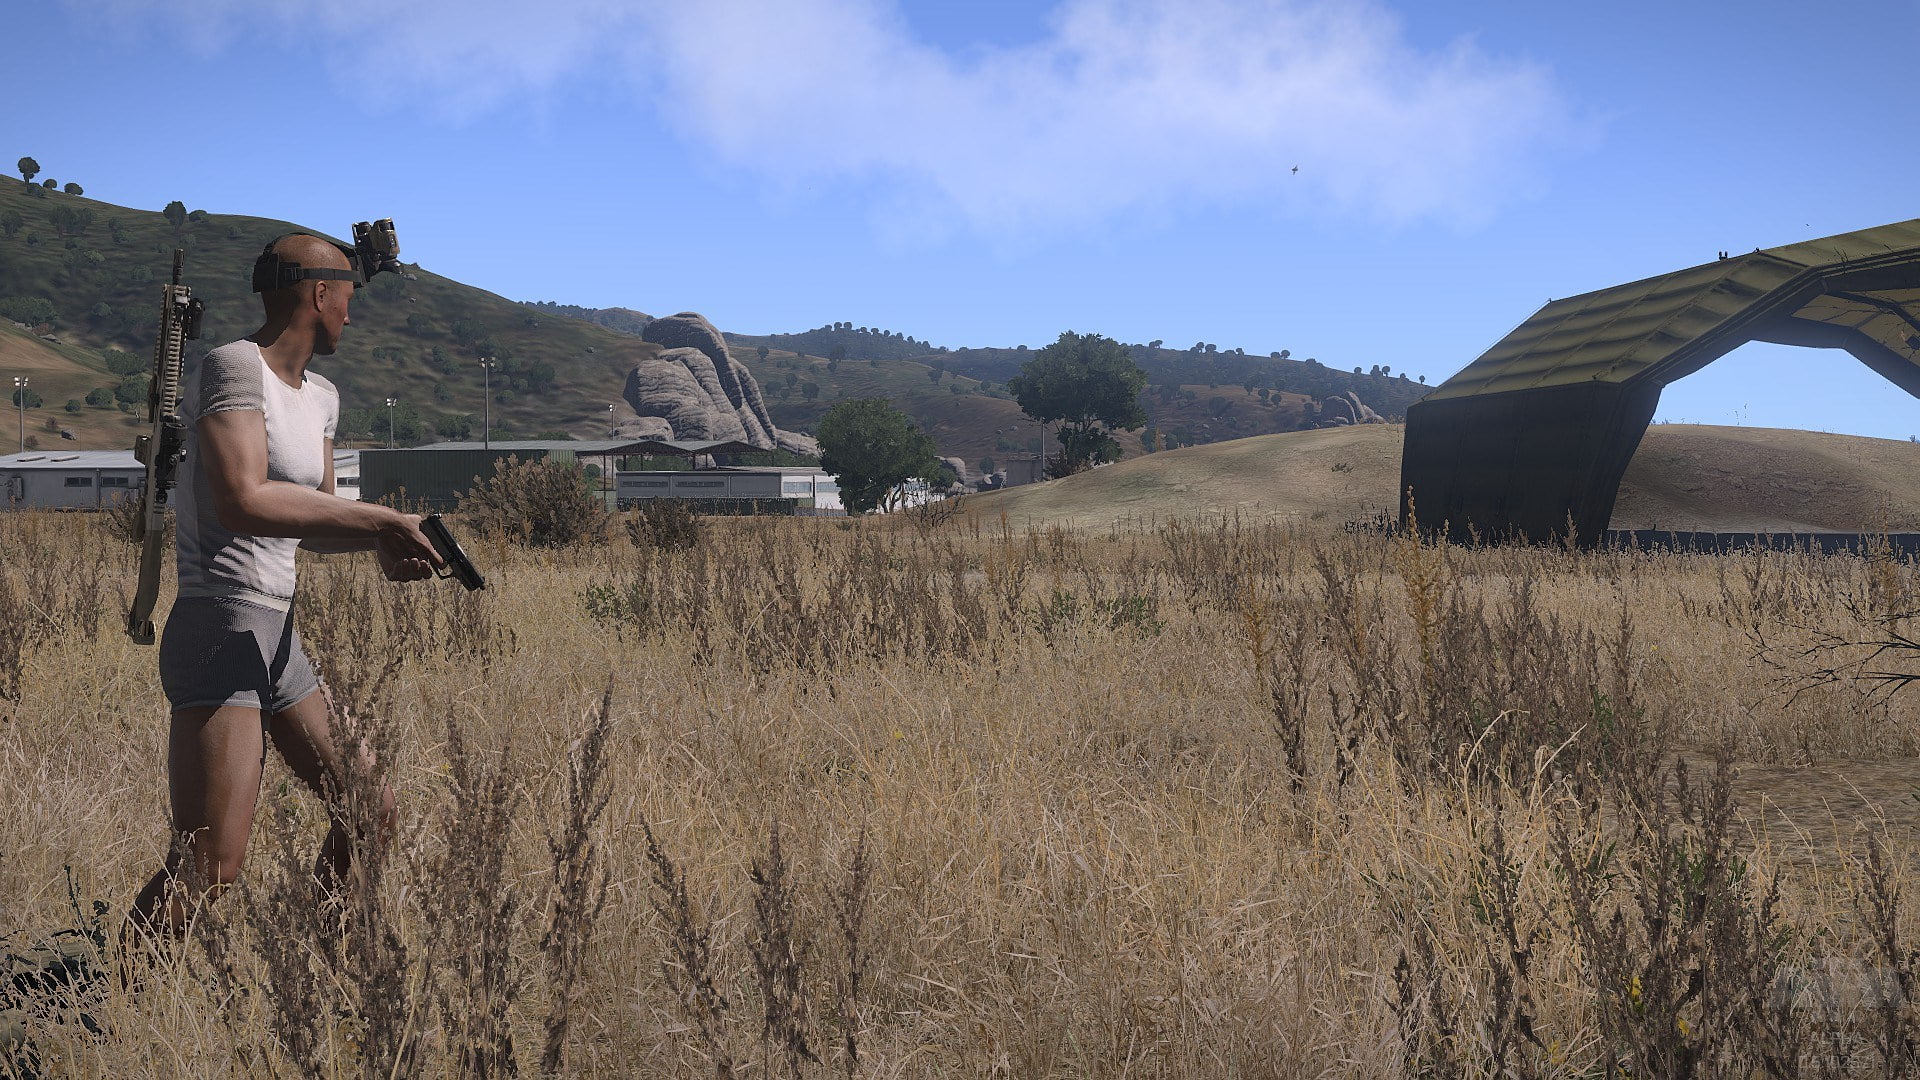 arma 3, land, one person, plant, adult, nature, landscape, field